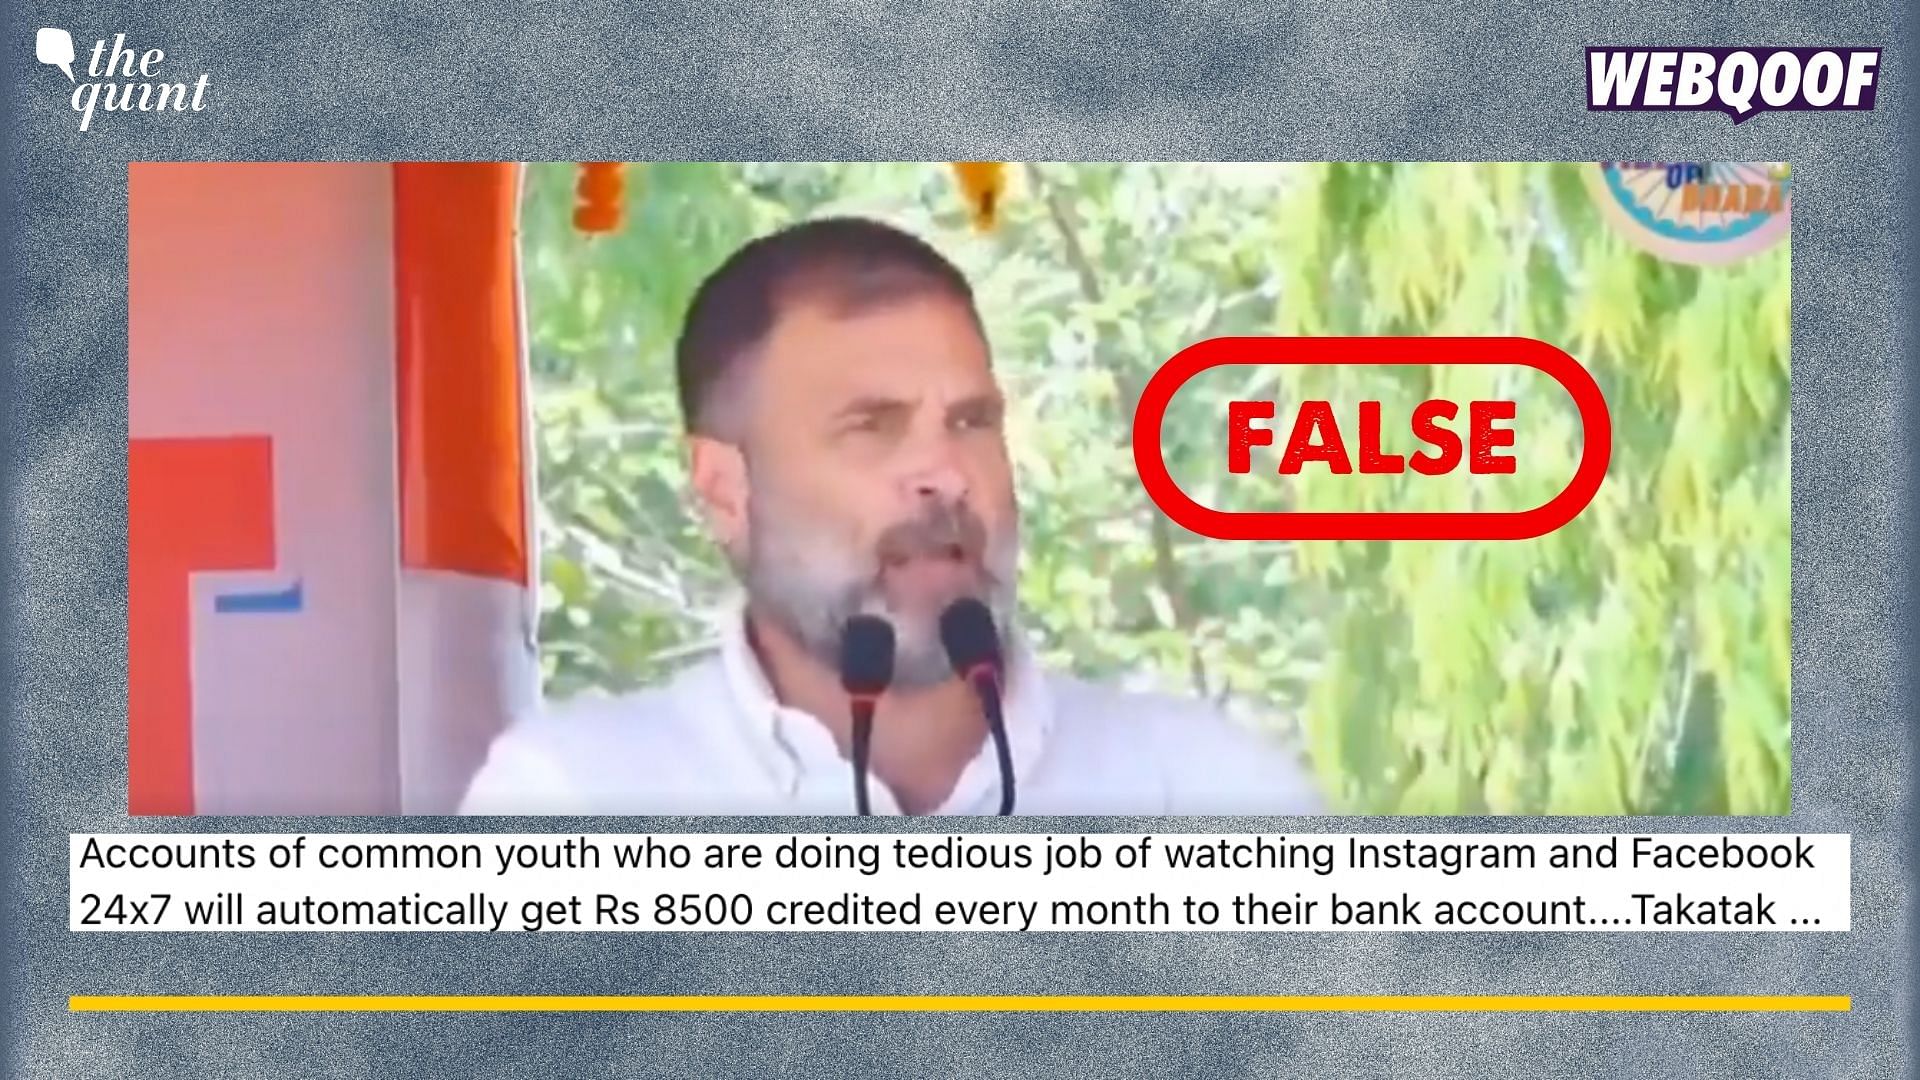 Clipped Video of Rahul Gandhi’s Speech in Bihar Shared With False Claims